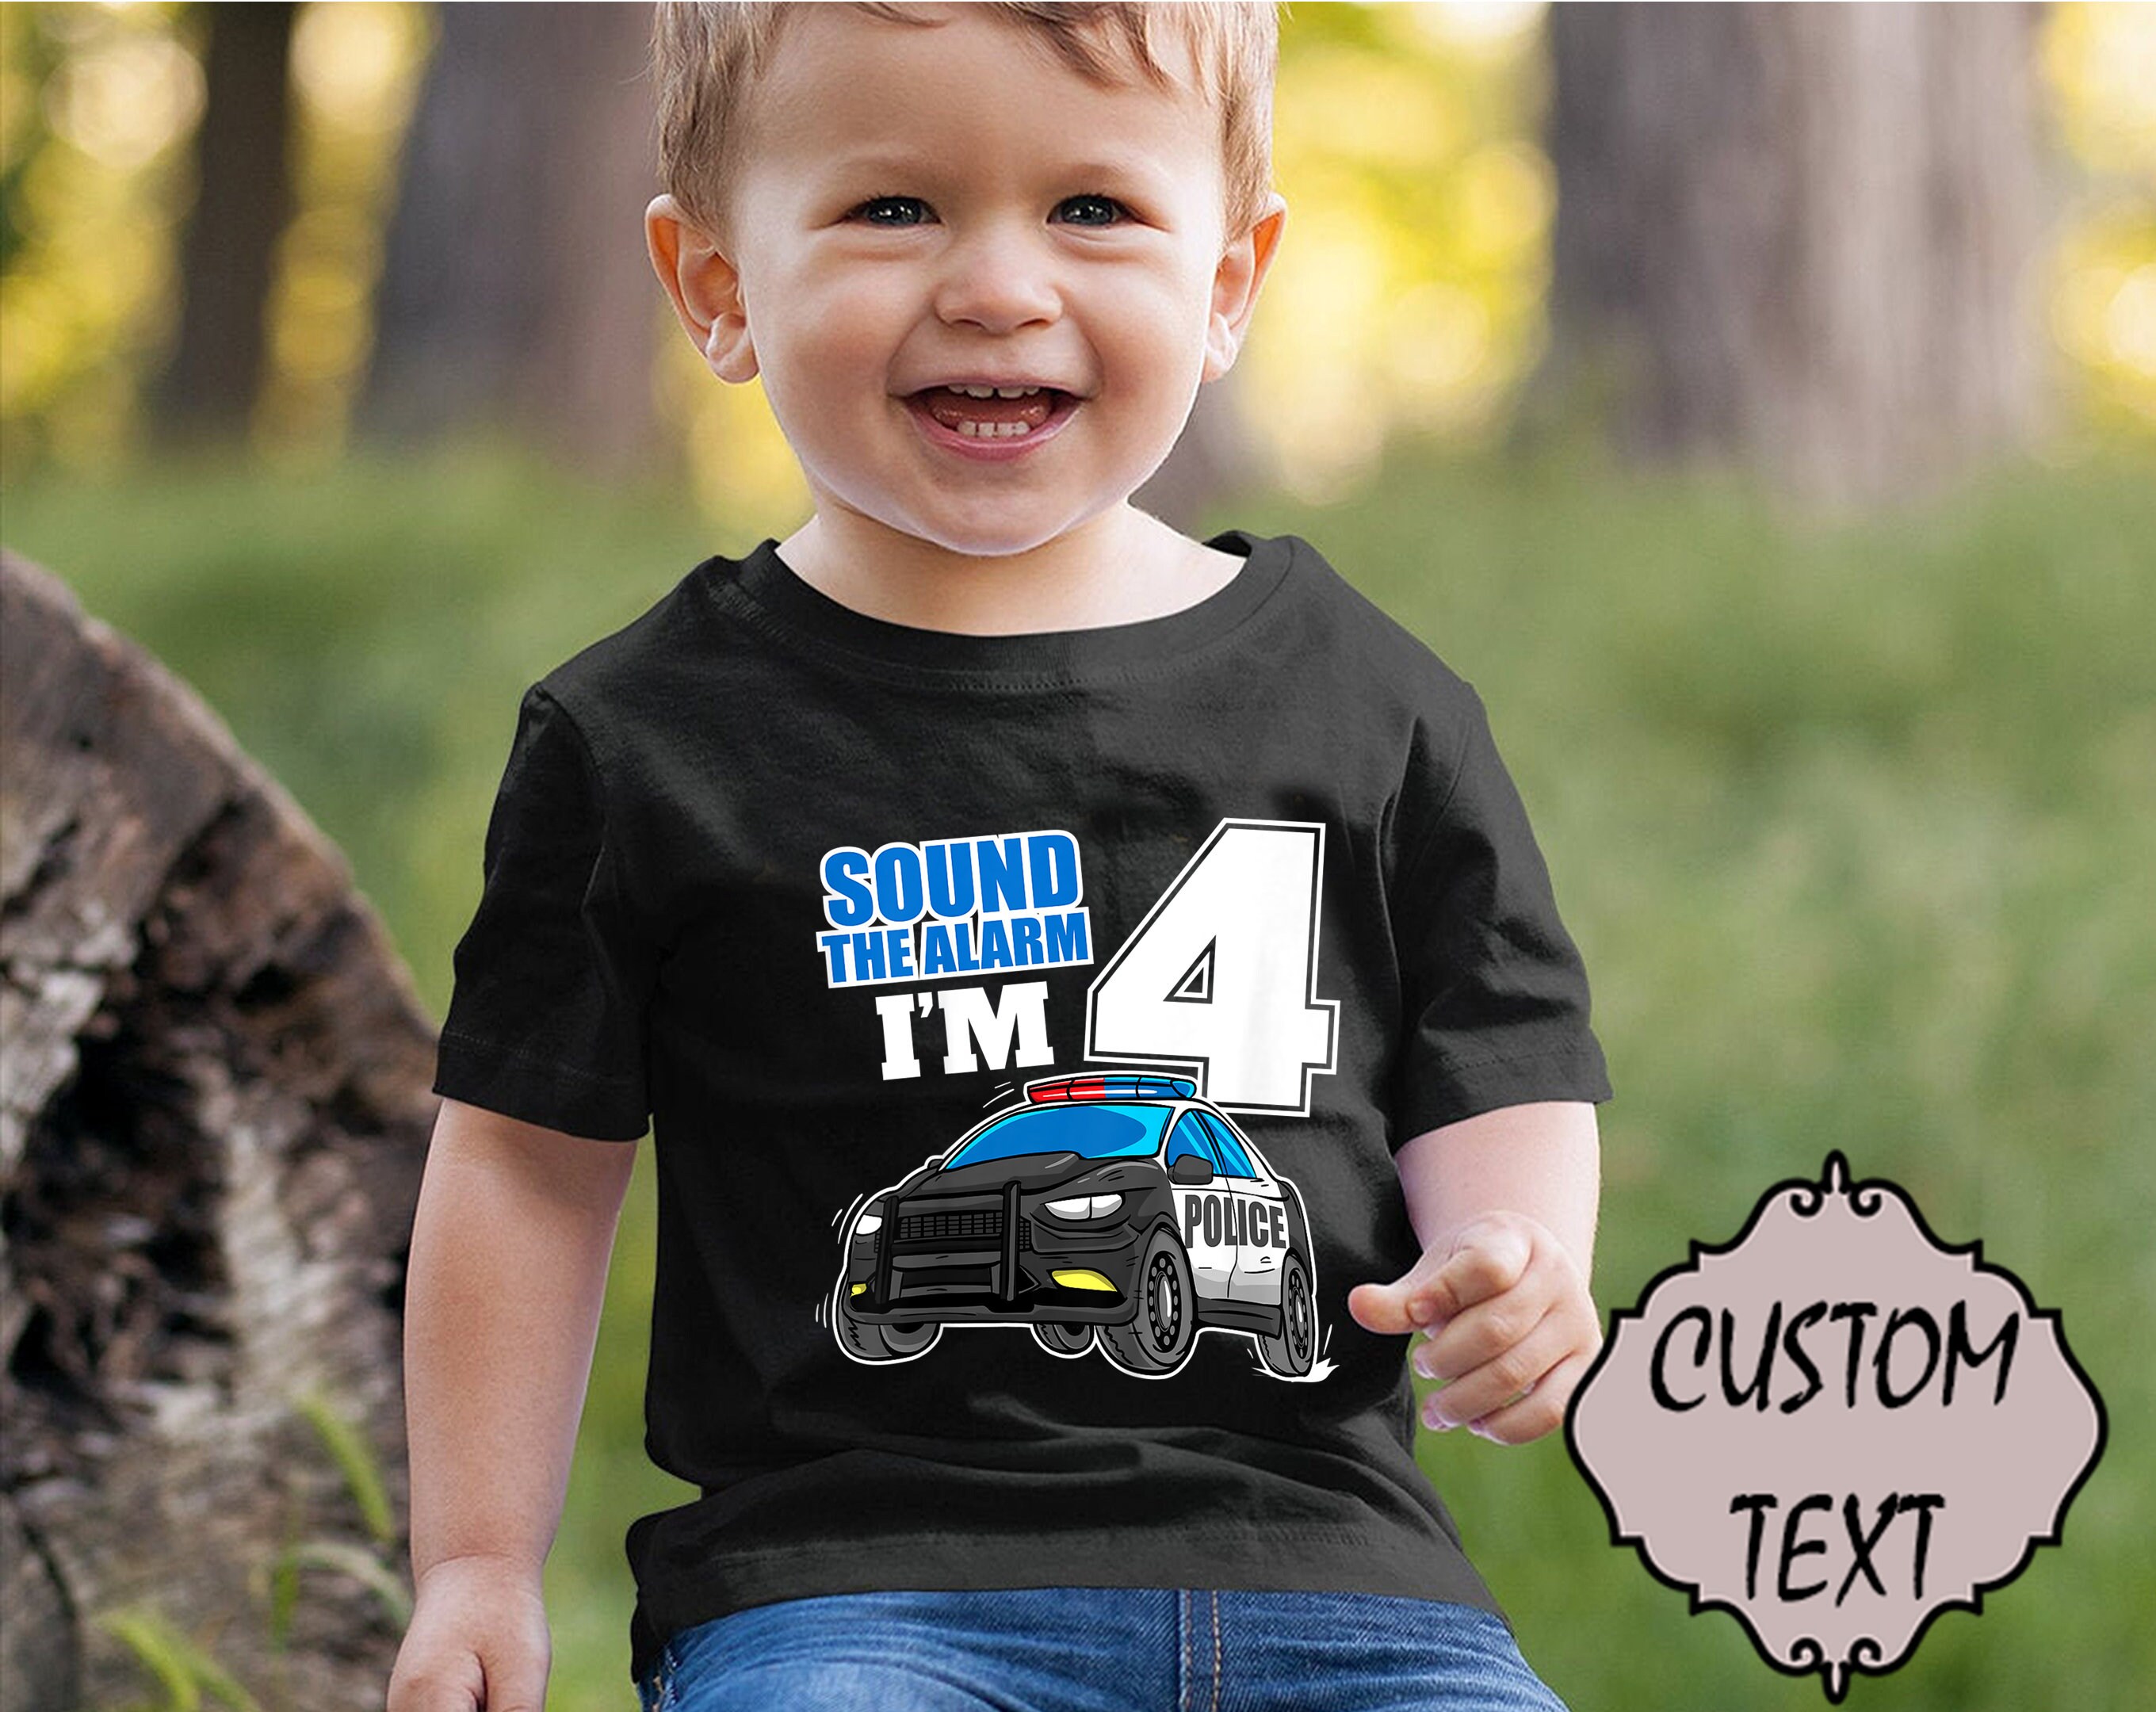 Boy Birthday Outfit Kids Police Shirt Toddler Gift Police birthday shirt Birthday Shirt Police Theme Birthday Police Kids Party 